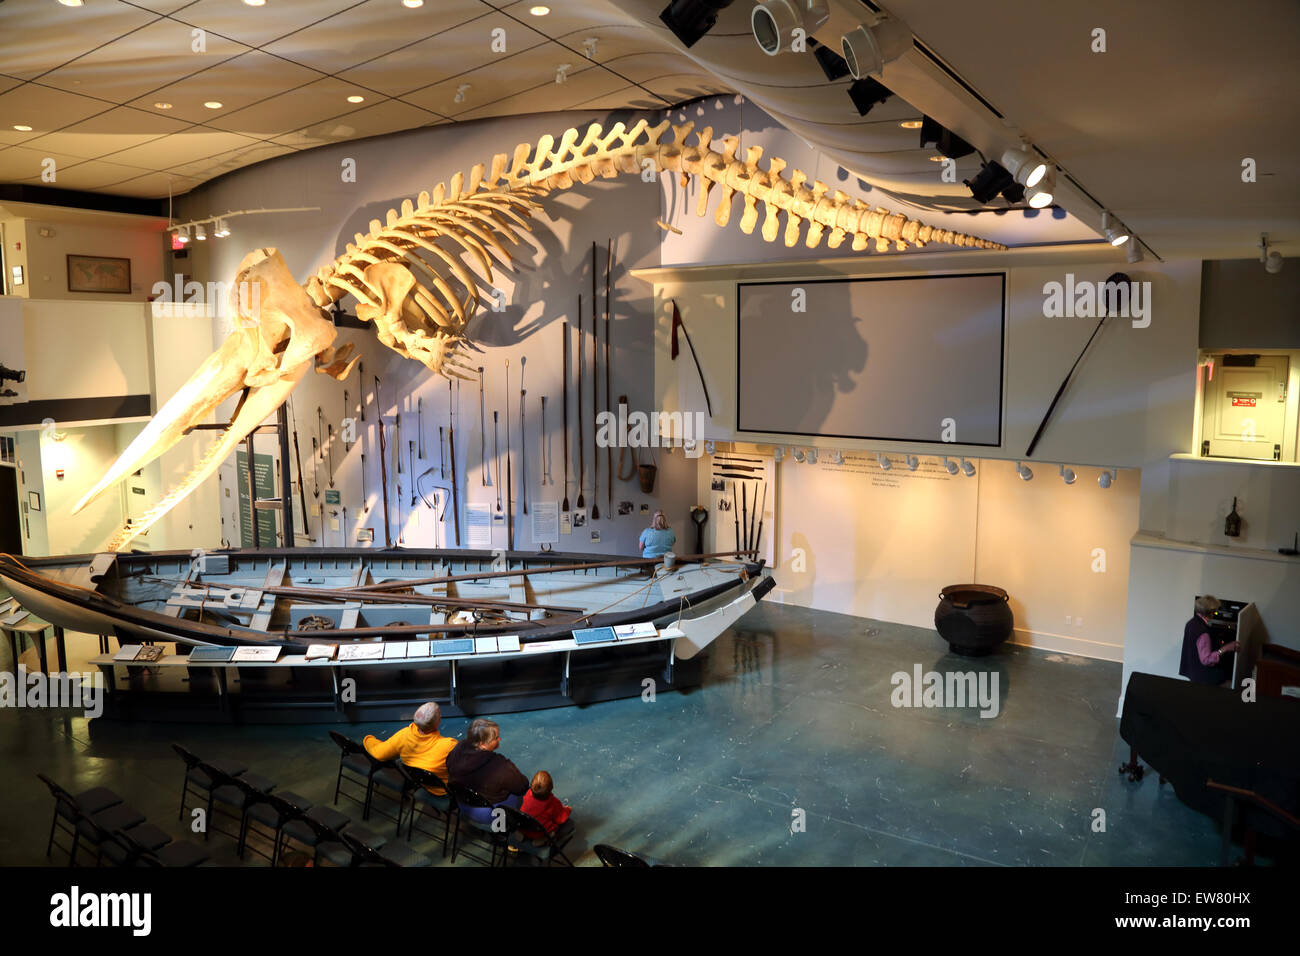 Sperm whale skeleton, whaling lecture room, Nantucket Whaling Museum, Nantucket, Massachusetts Stock Photo